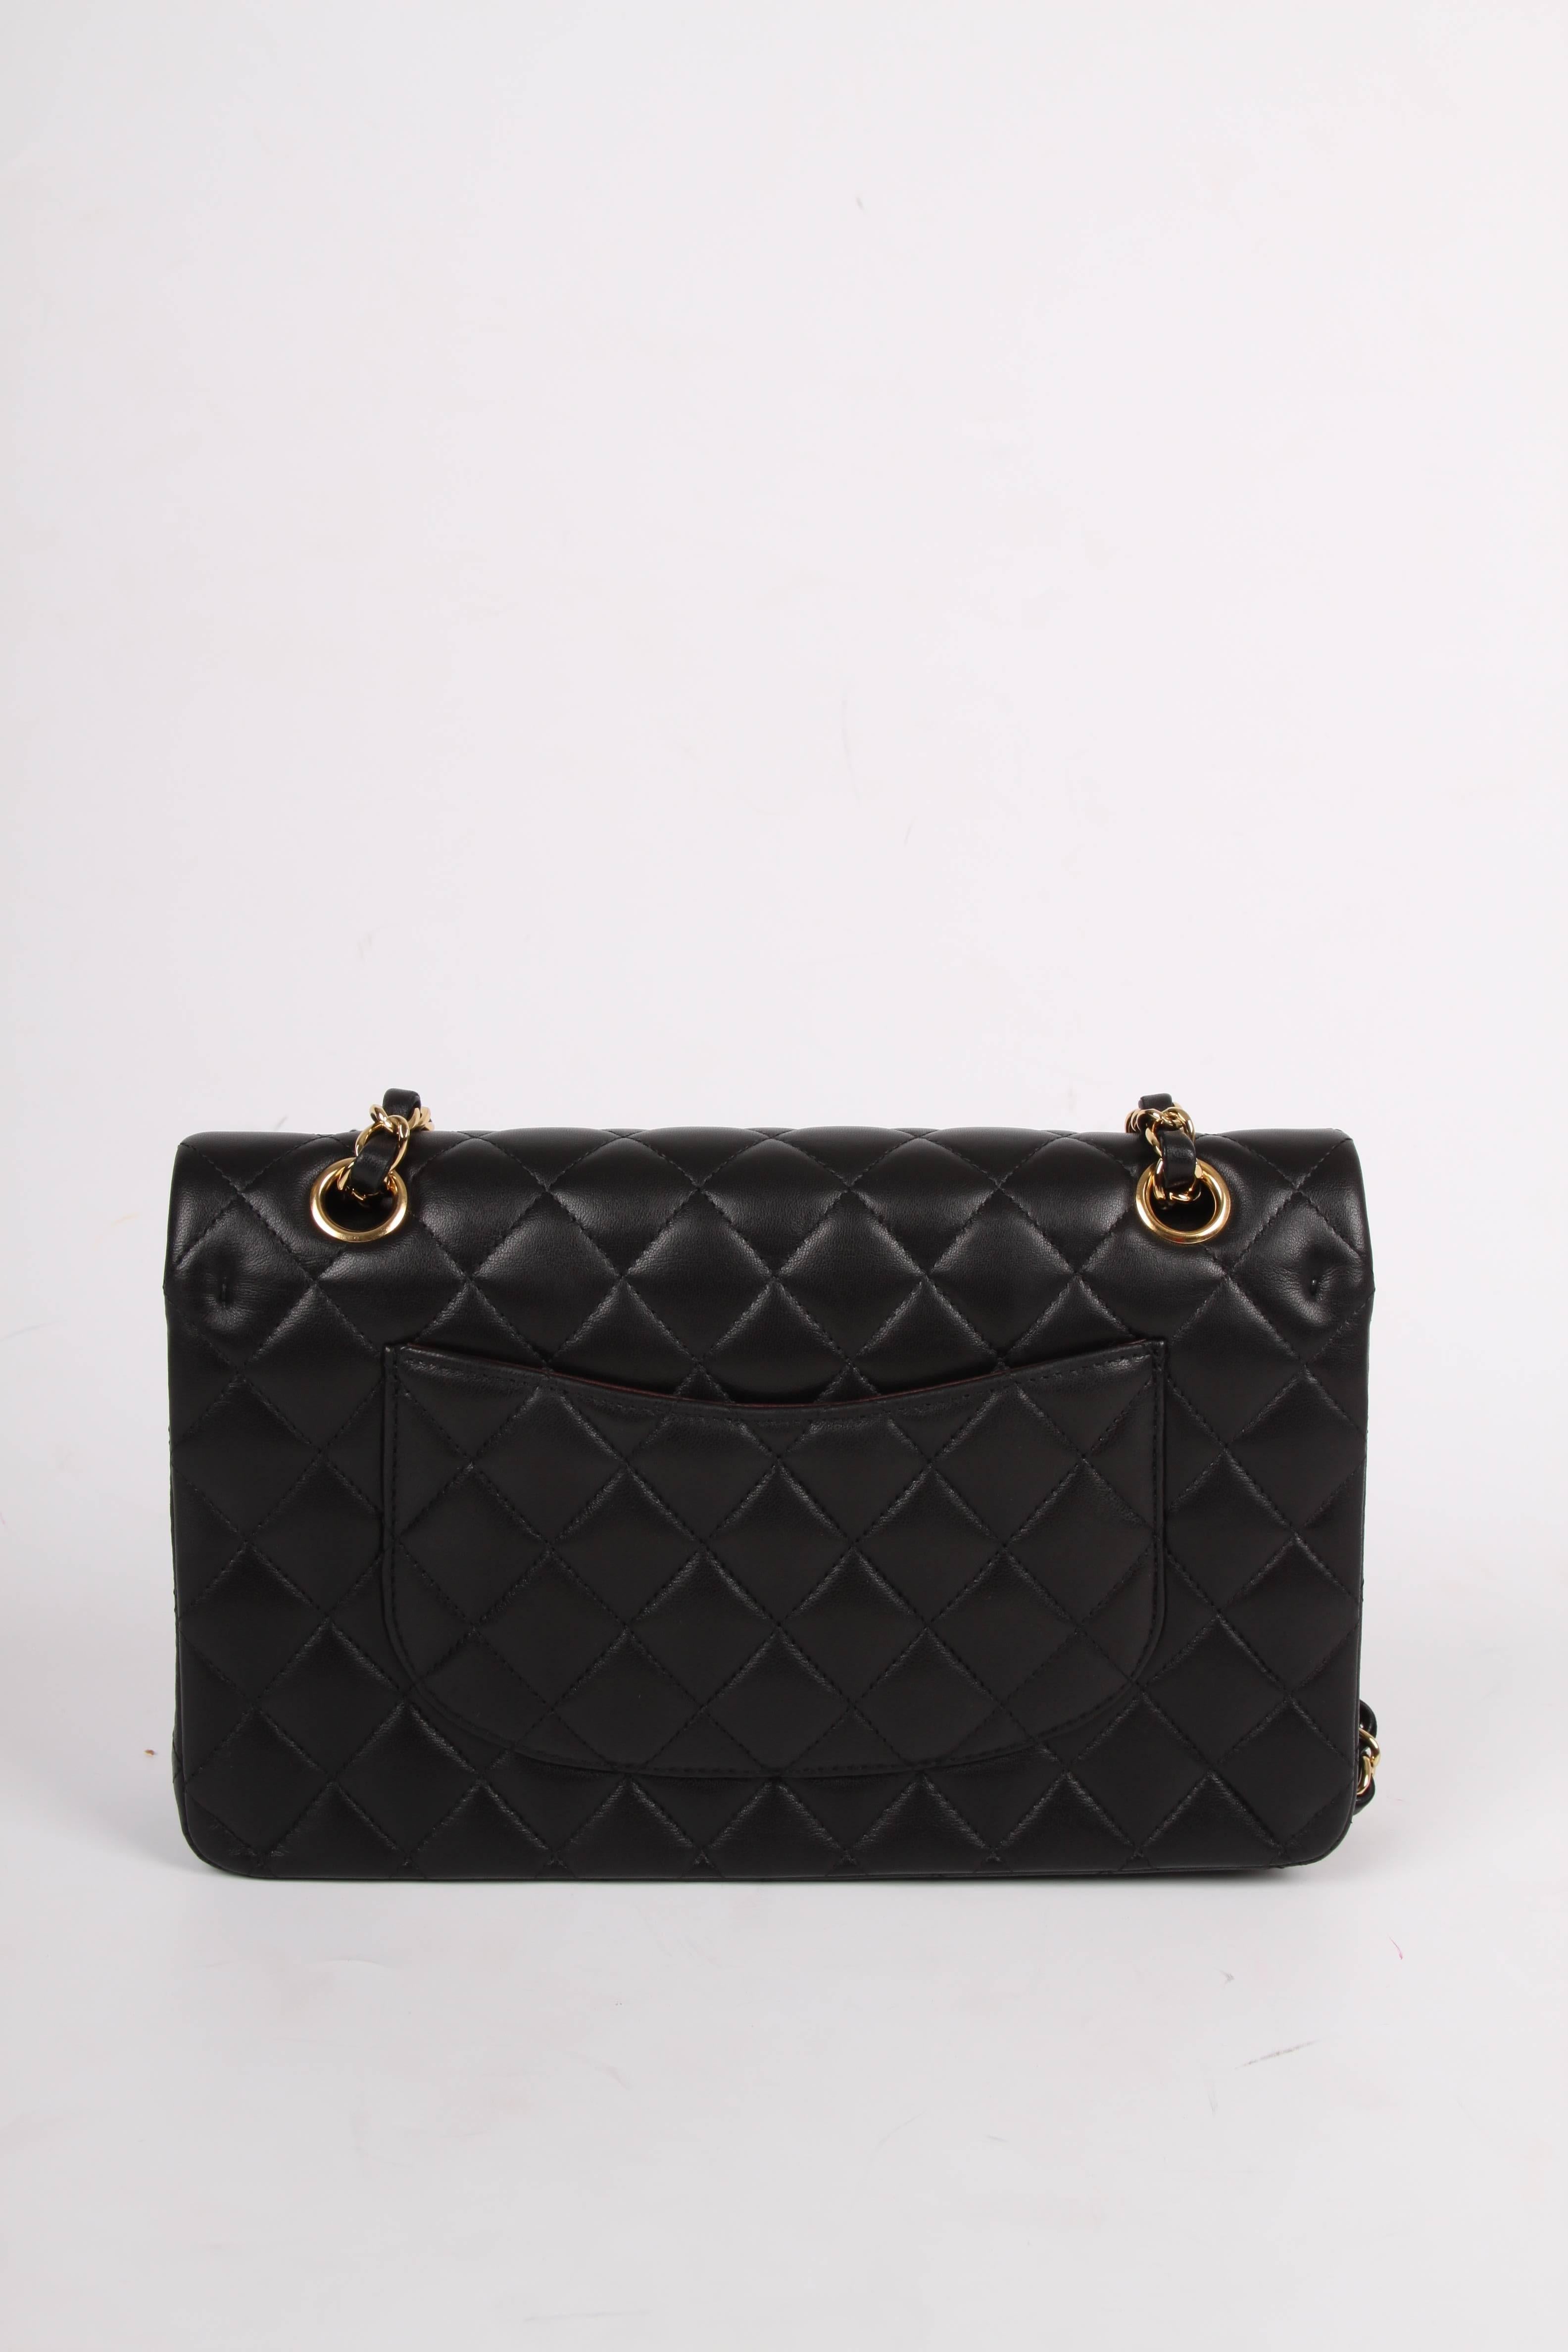 Classic bag by Chanel in black lambskin leather, this piece is like new!

This 2.55 medium double flap bag is the middle size of this classic model and measures 26 centimeters in length and is 16 centimeters high. A golden chain which can be worn